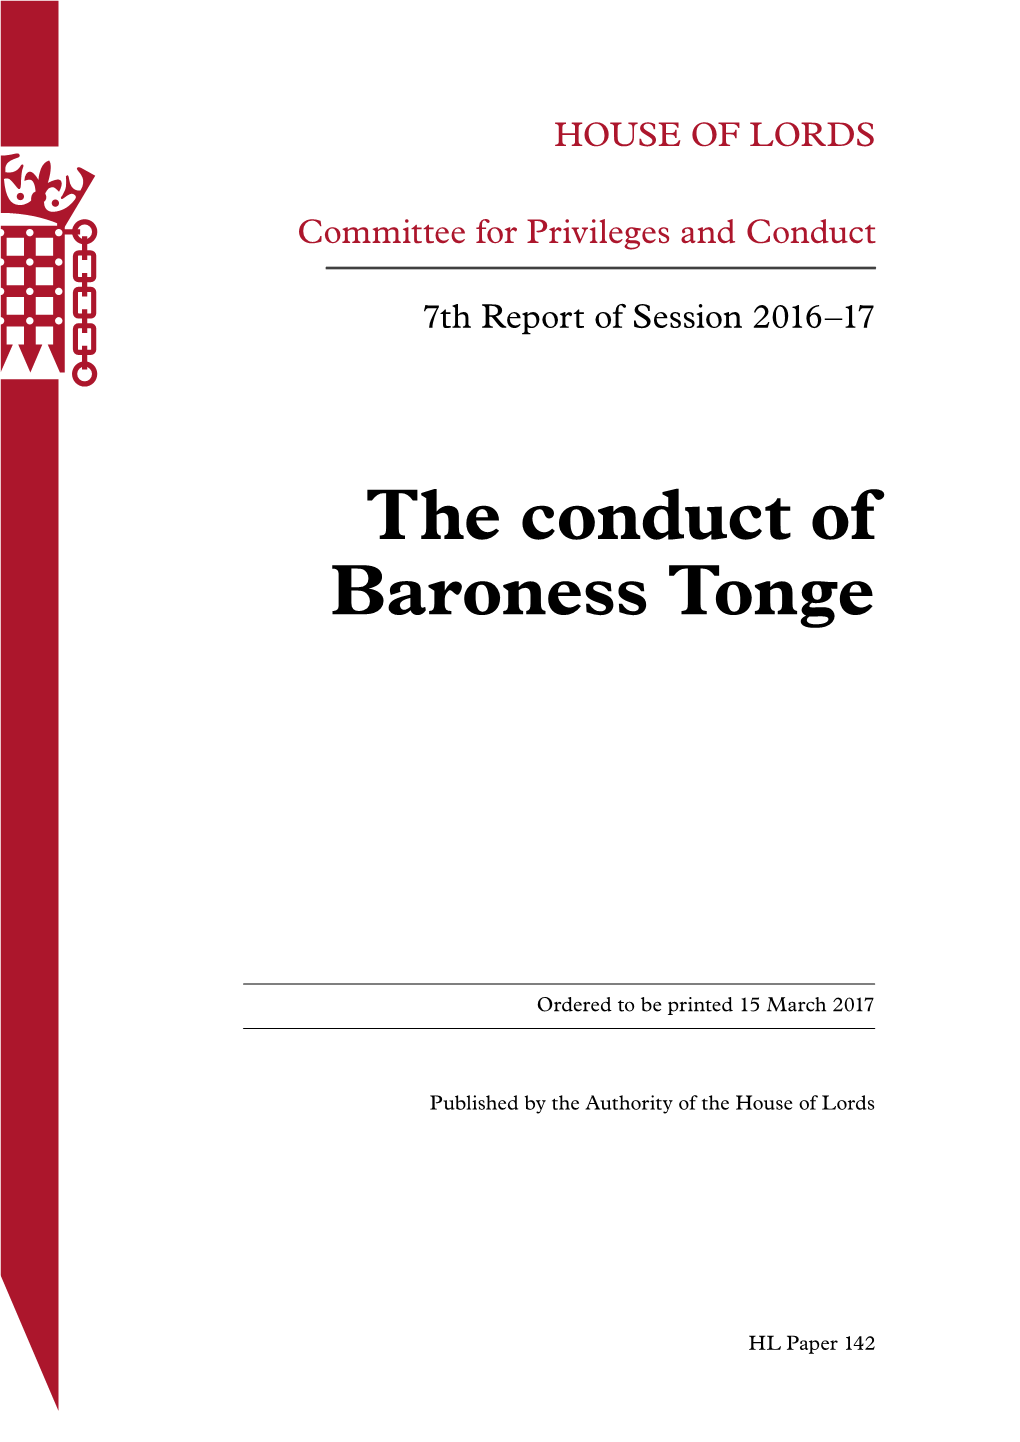 The Conduct of Baroness Tonge